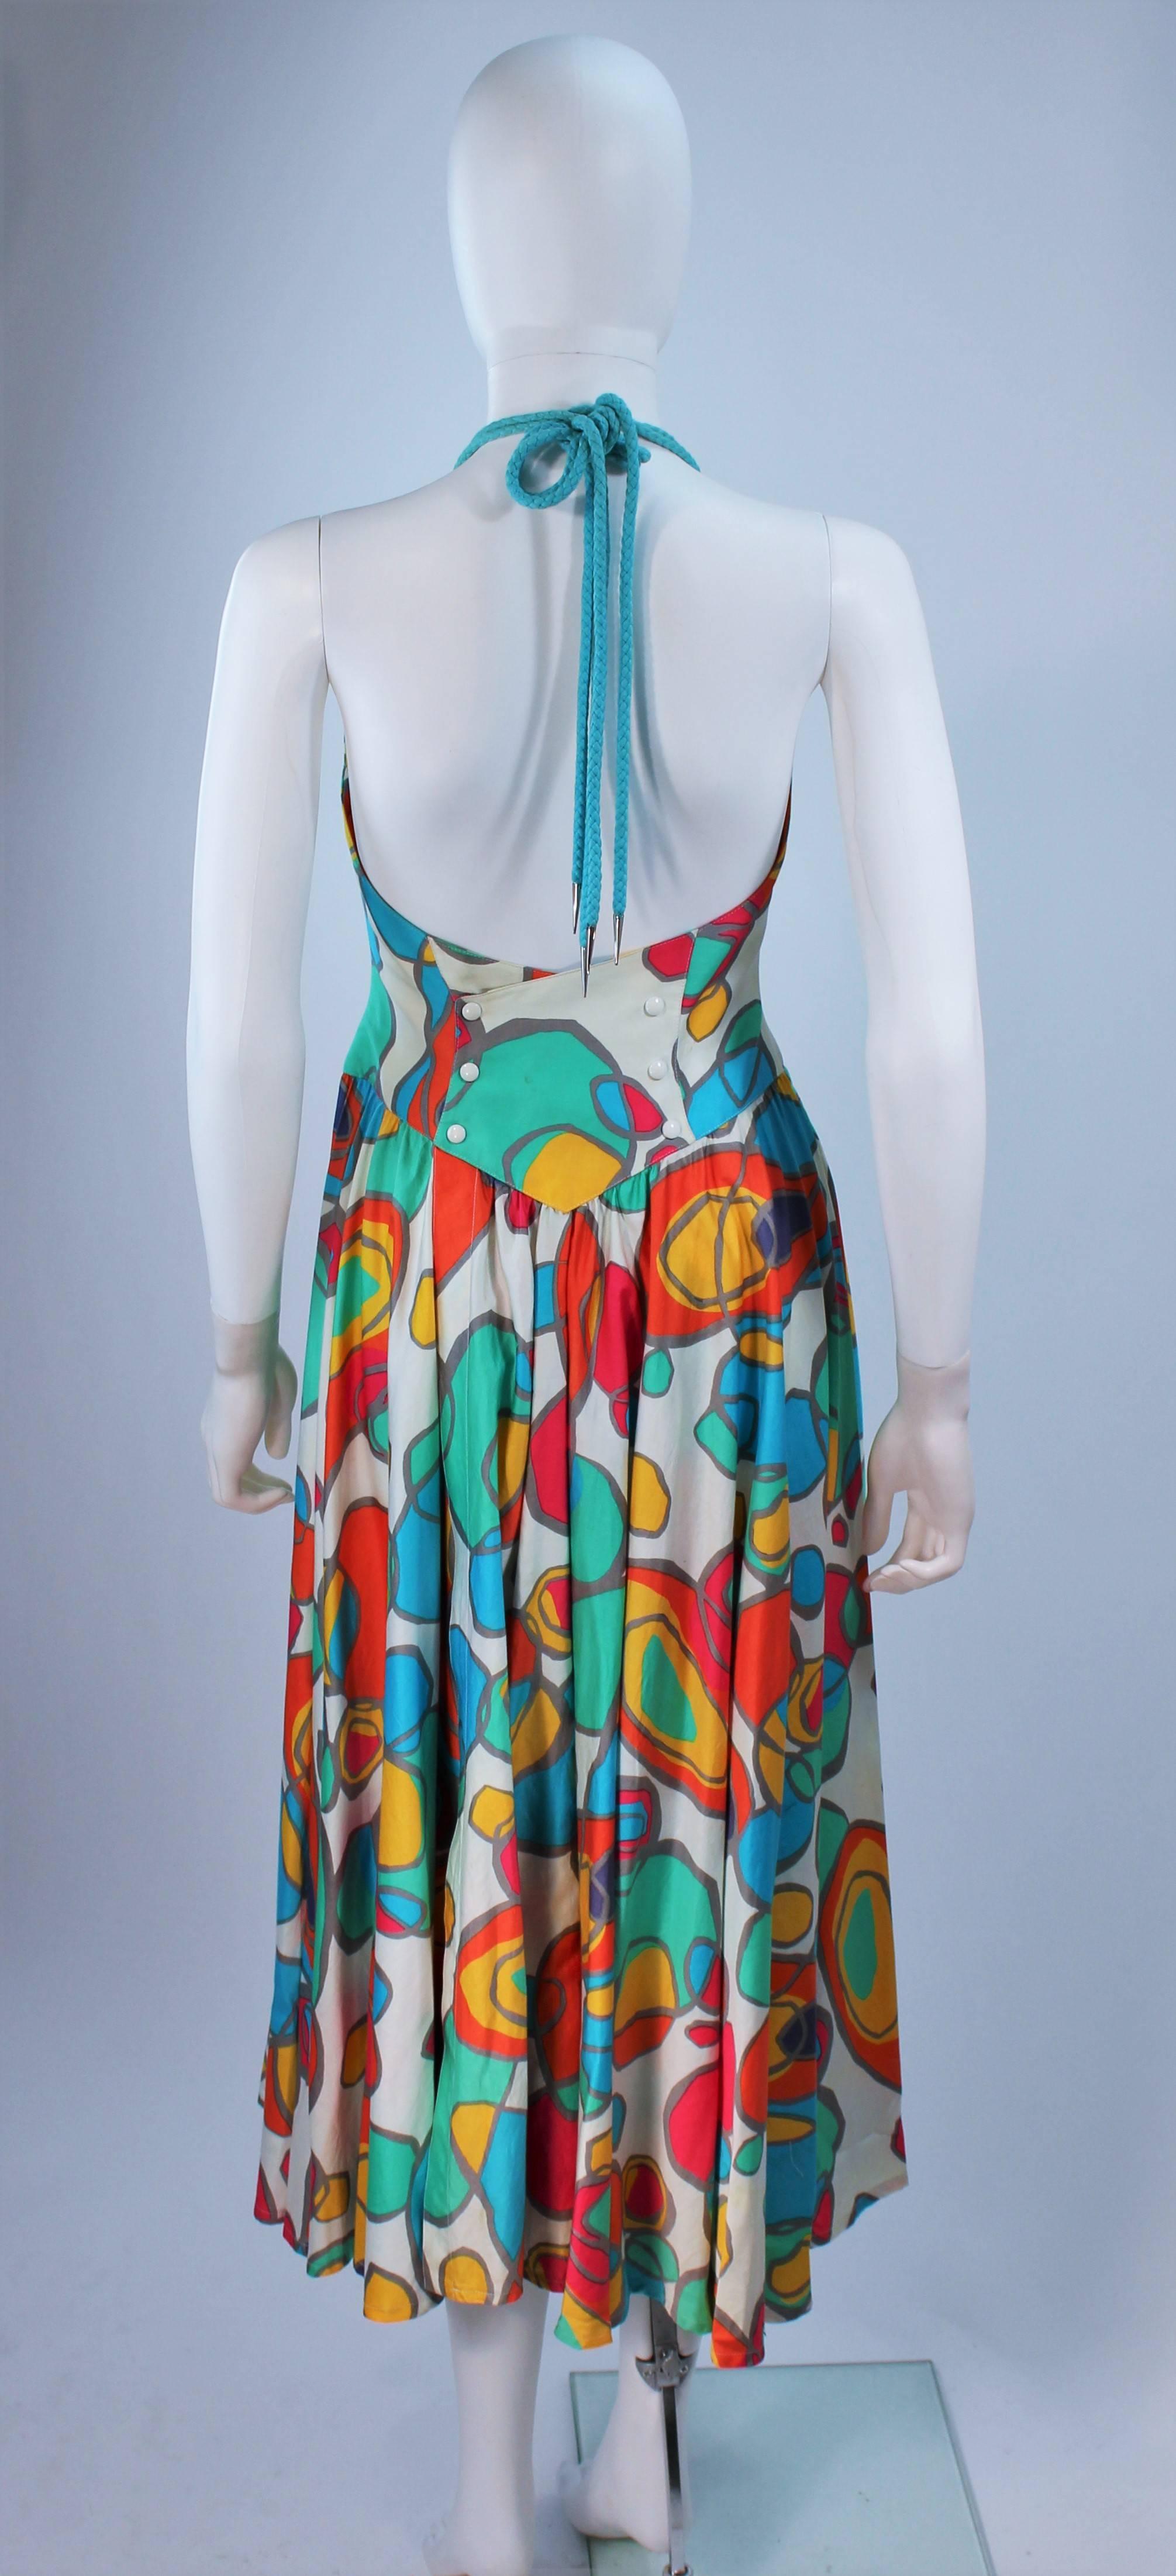 THIERRY MUGLER Printed Halter Dress Size 32 For Sale 1